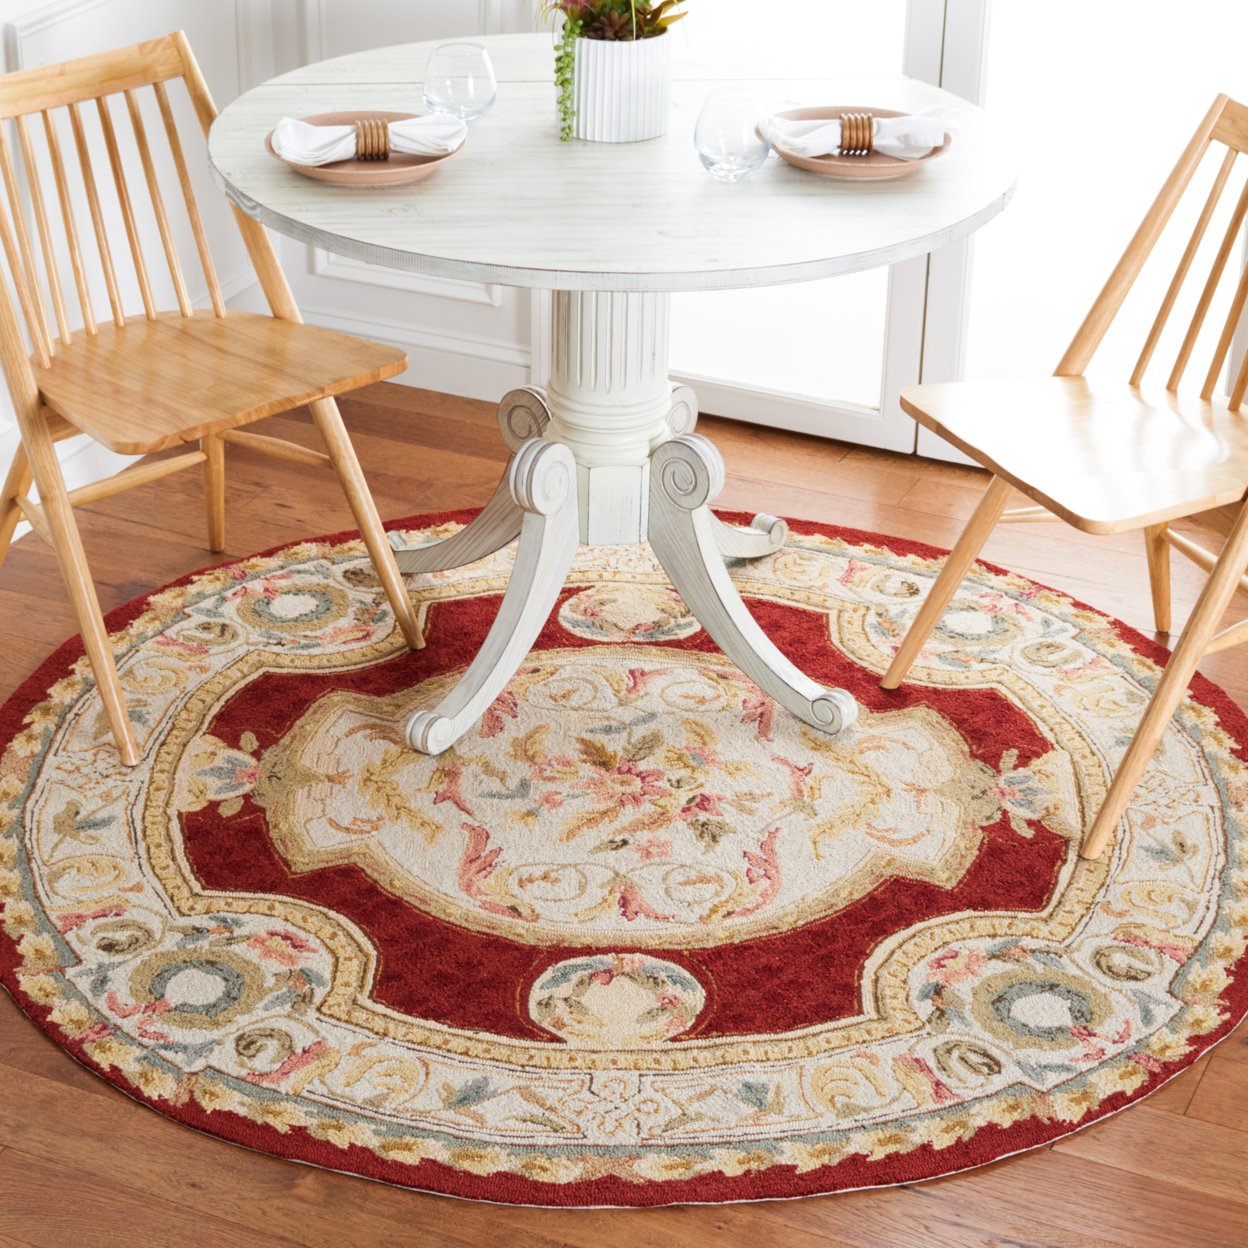 SAFAVIEH Easy Care EZC755A Ivory / Red Rug - 8' Round